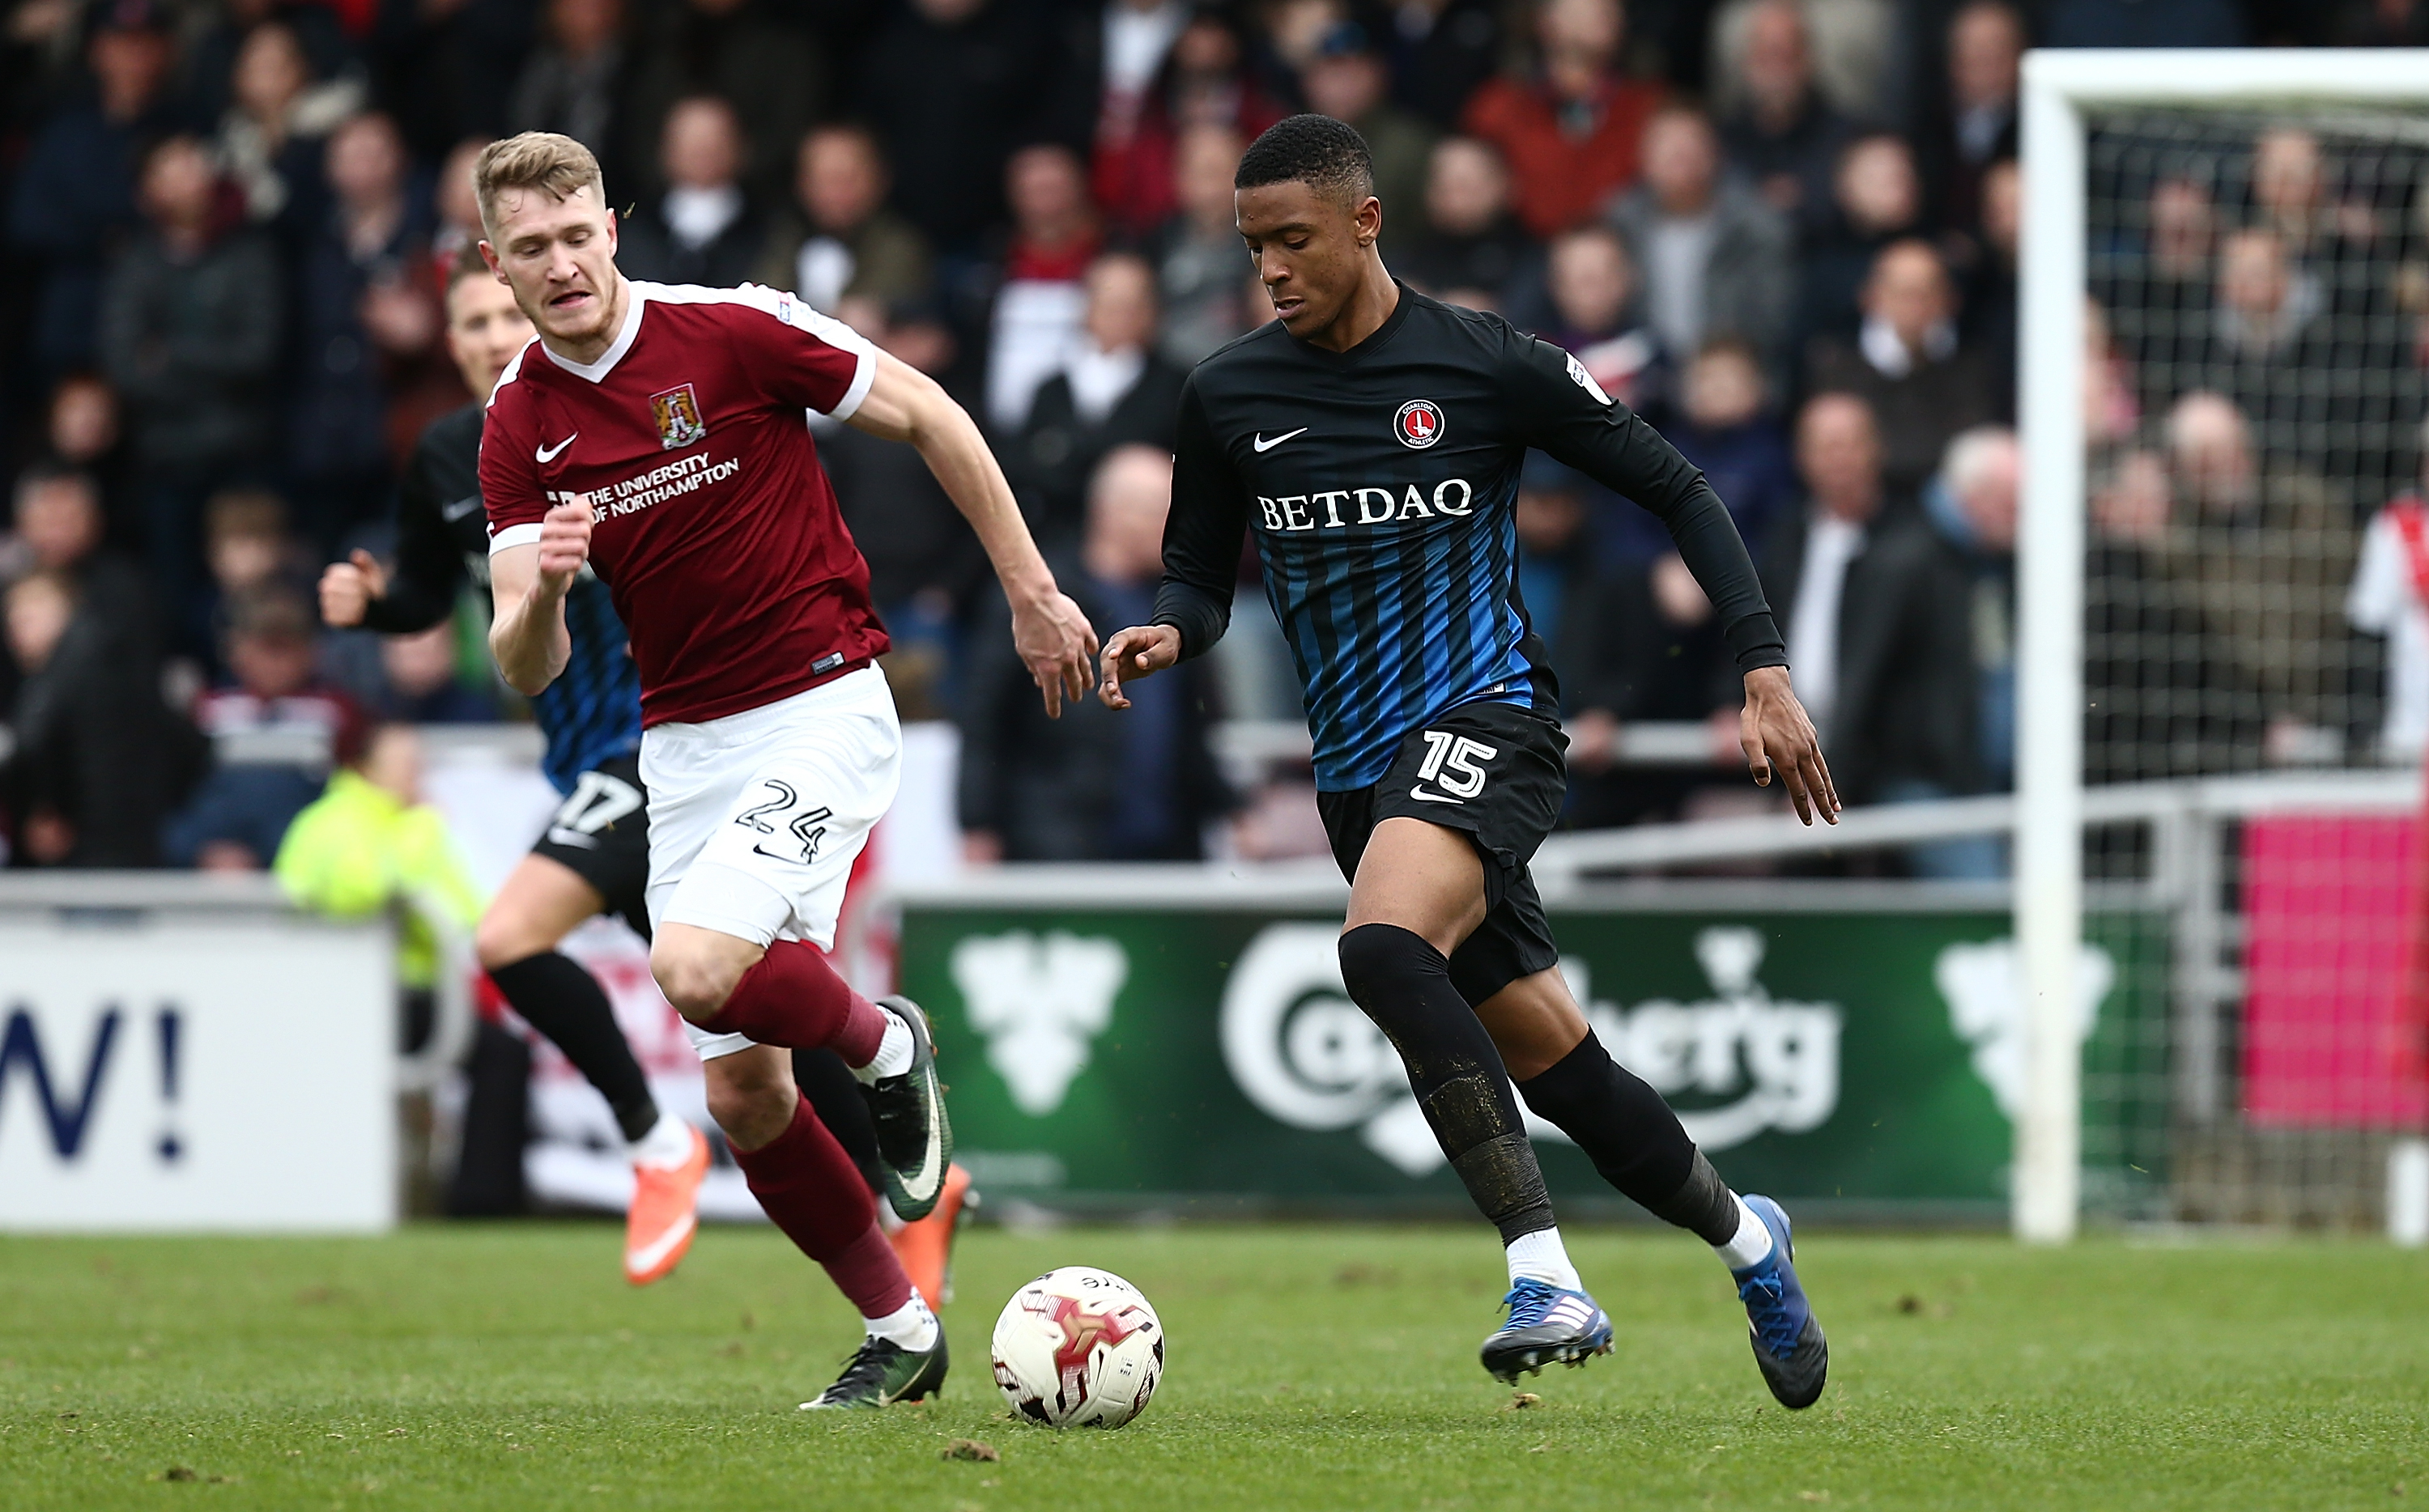 NORTHAMPTON, ENGLAND - MARCH 04:  Ezri Konsa Ngoyo of Charlton Athletic moves forward with the ball away from Michael Smith of Northampton Town during the Sky Bet League One match betweenNorthampton Town and Charlton Athletic at Sixfields on March 4, 2017 in Northampton, England.  (Photo by Pete Norton/Getty Images)